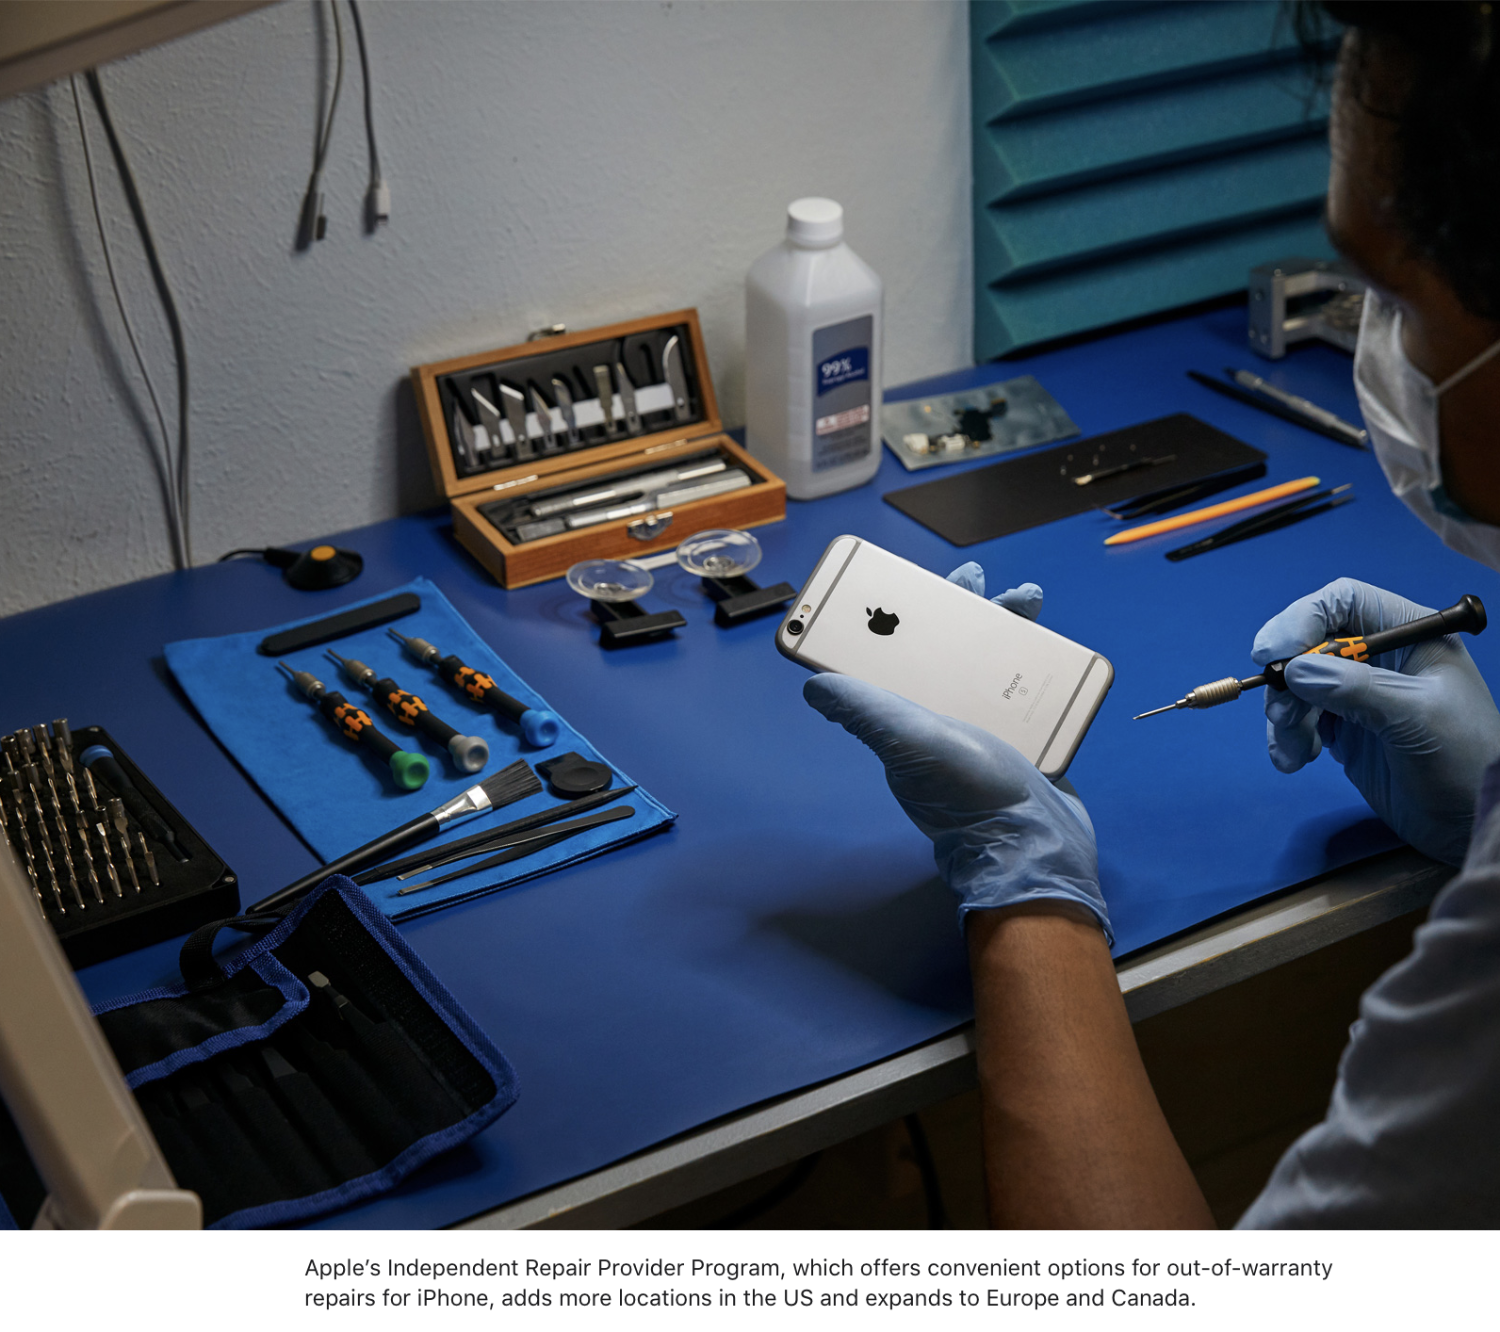 Apple expands iPhone repair services to hundreds of new locations across the U.S.